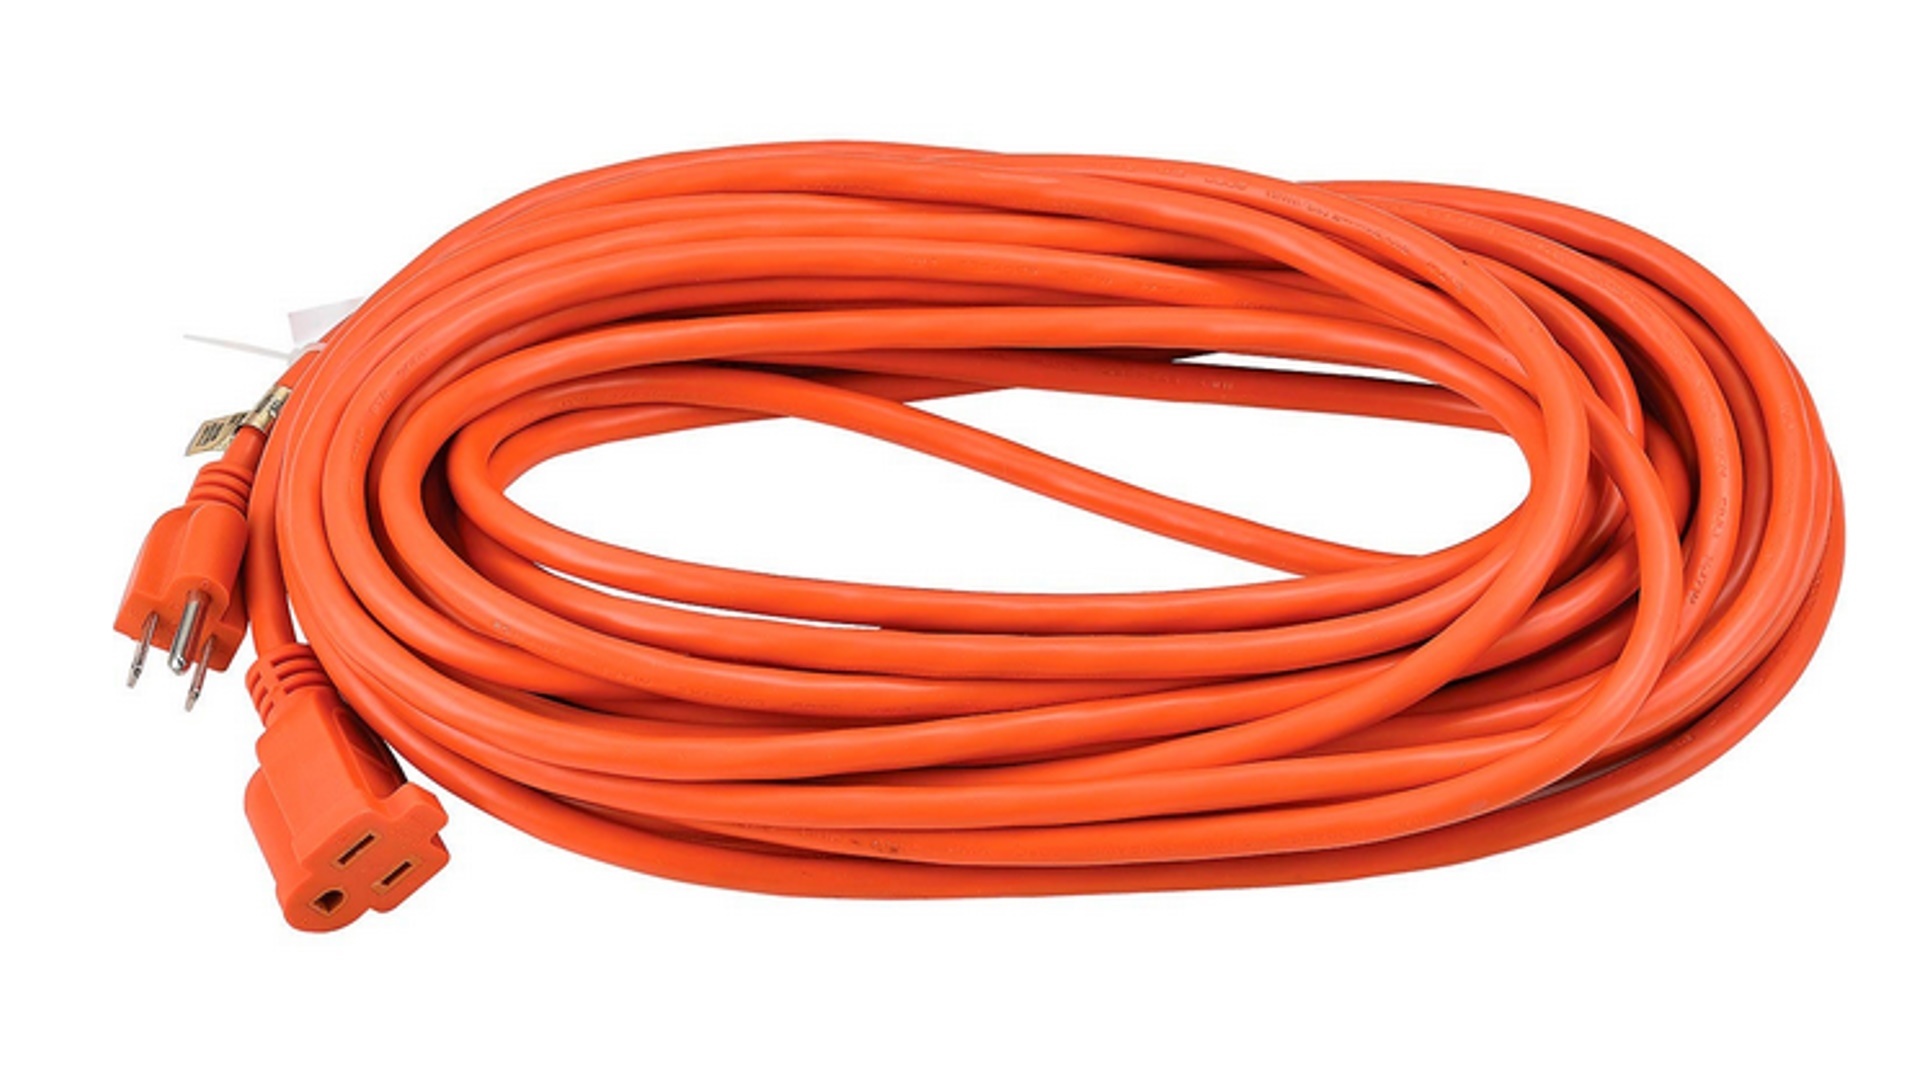 An Electrician's Guide to Using An Extension Cord